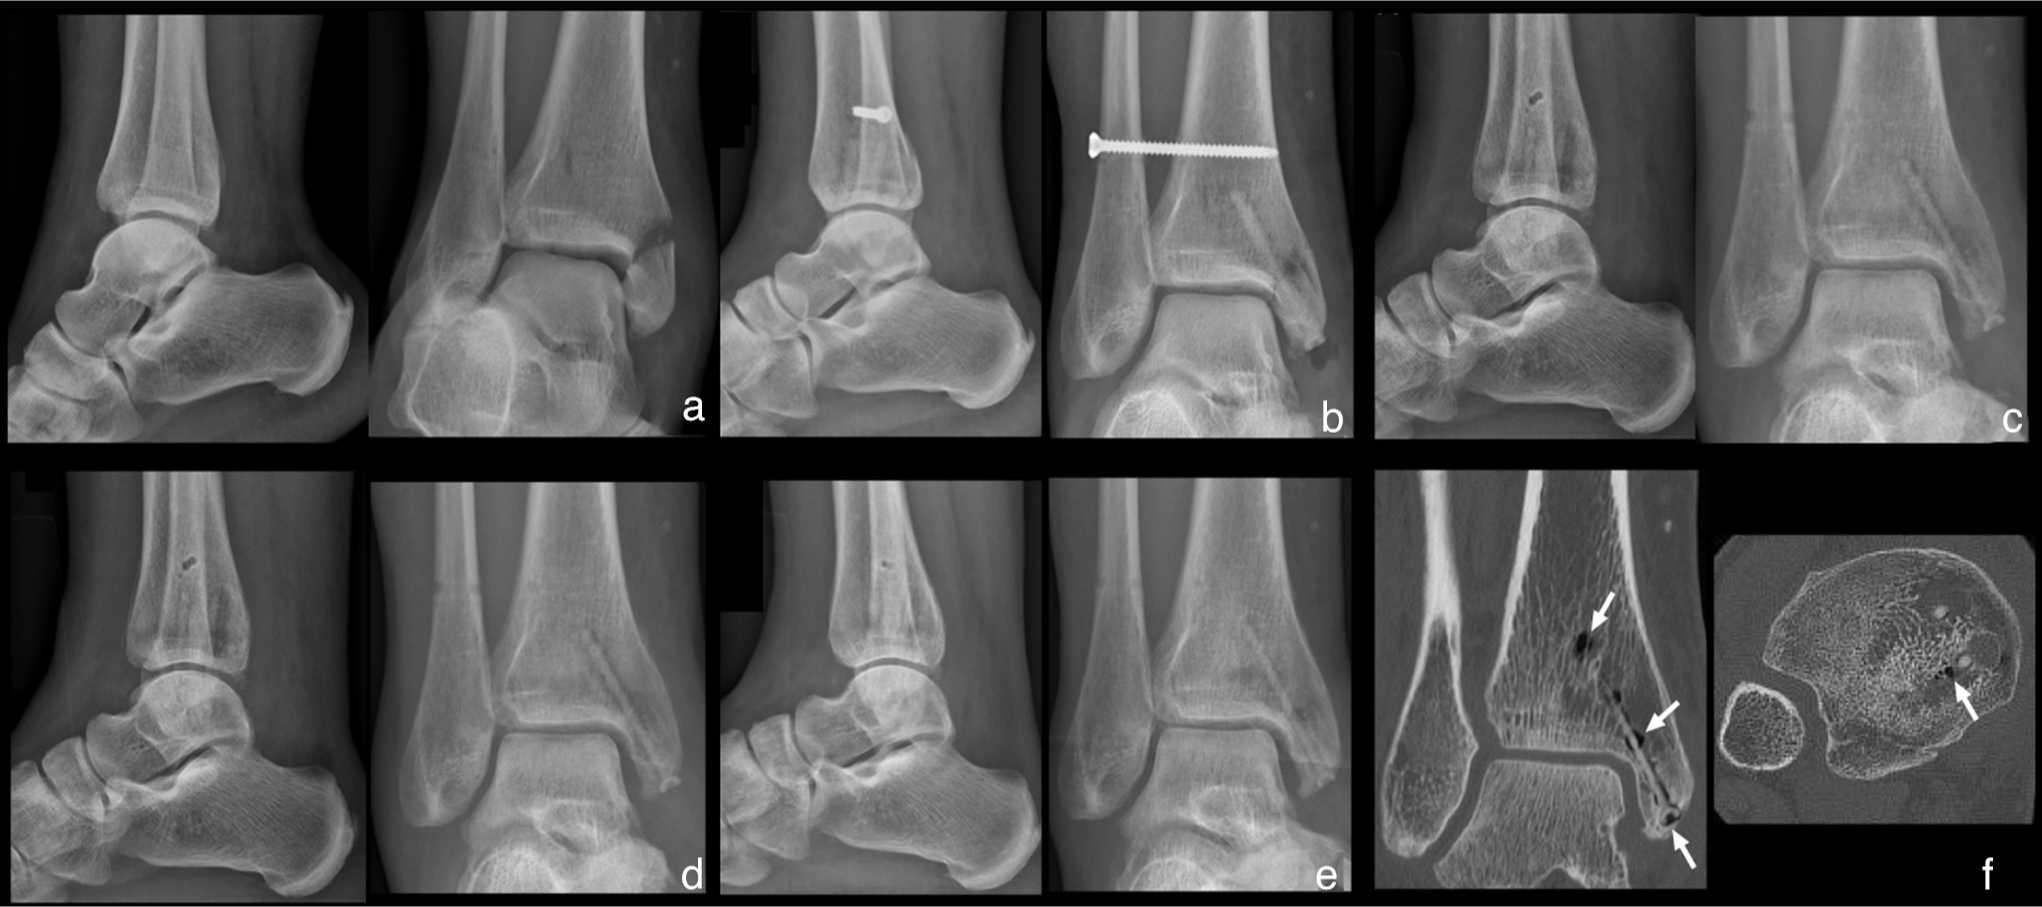 Fig. 3 
            a) Anteroposterior and lateral ankle radiographs of a 49-year-old female patient; medial malleolar fracture combined with distal tibiofibular joint disruption (Maisonneuve fracture). b) Two-week timepoint radiographs, anatomical reduction with two magnesium (Mg)-based screws and one titanium screw; visible fracture line at the medial malleolus, small signs of radiolucent zones within the bone surrounding the screws. c) Six-week timepoint, plane radiographs with complete fracture consolidation, increase of radiolucent zones within the bone surrounding the screws, removed titanium screw. d) Timepoint radiograph images at 12 weeks with constant radiolucent zones. e) Timepoint radiographs at 24 weeks. f) CT scan at 52 weeks, decrease of radiolucent zones, increased endosteal bone mass, and periosteal bone ingrowth at the screw head (white arrow).
          